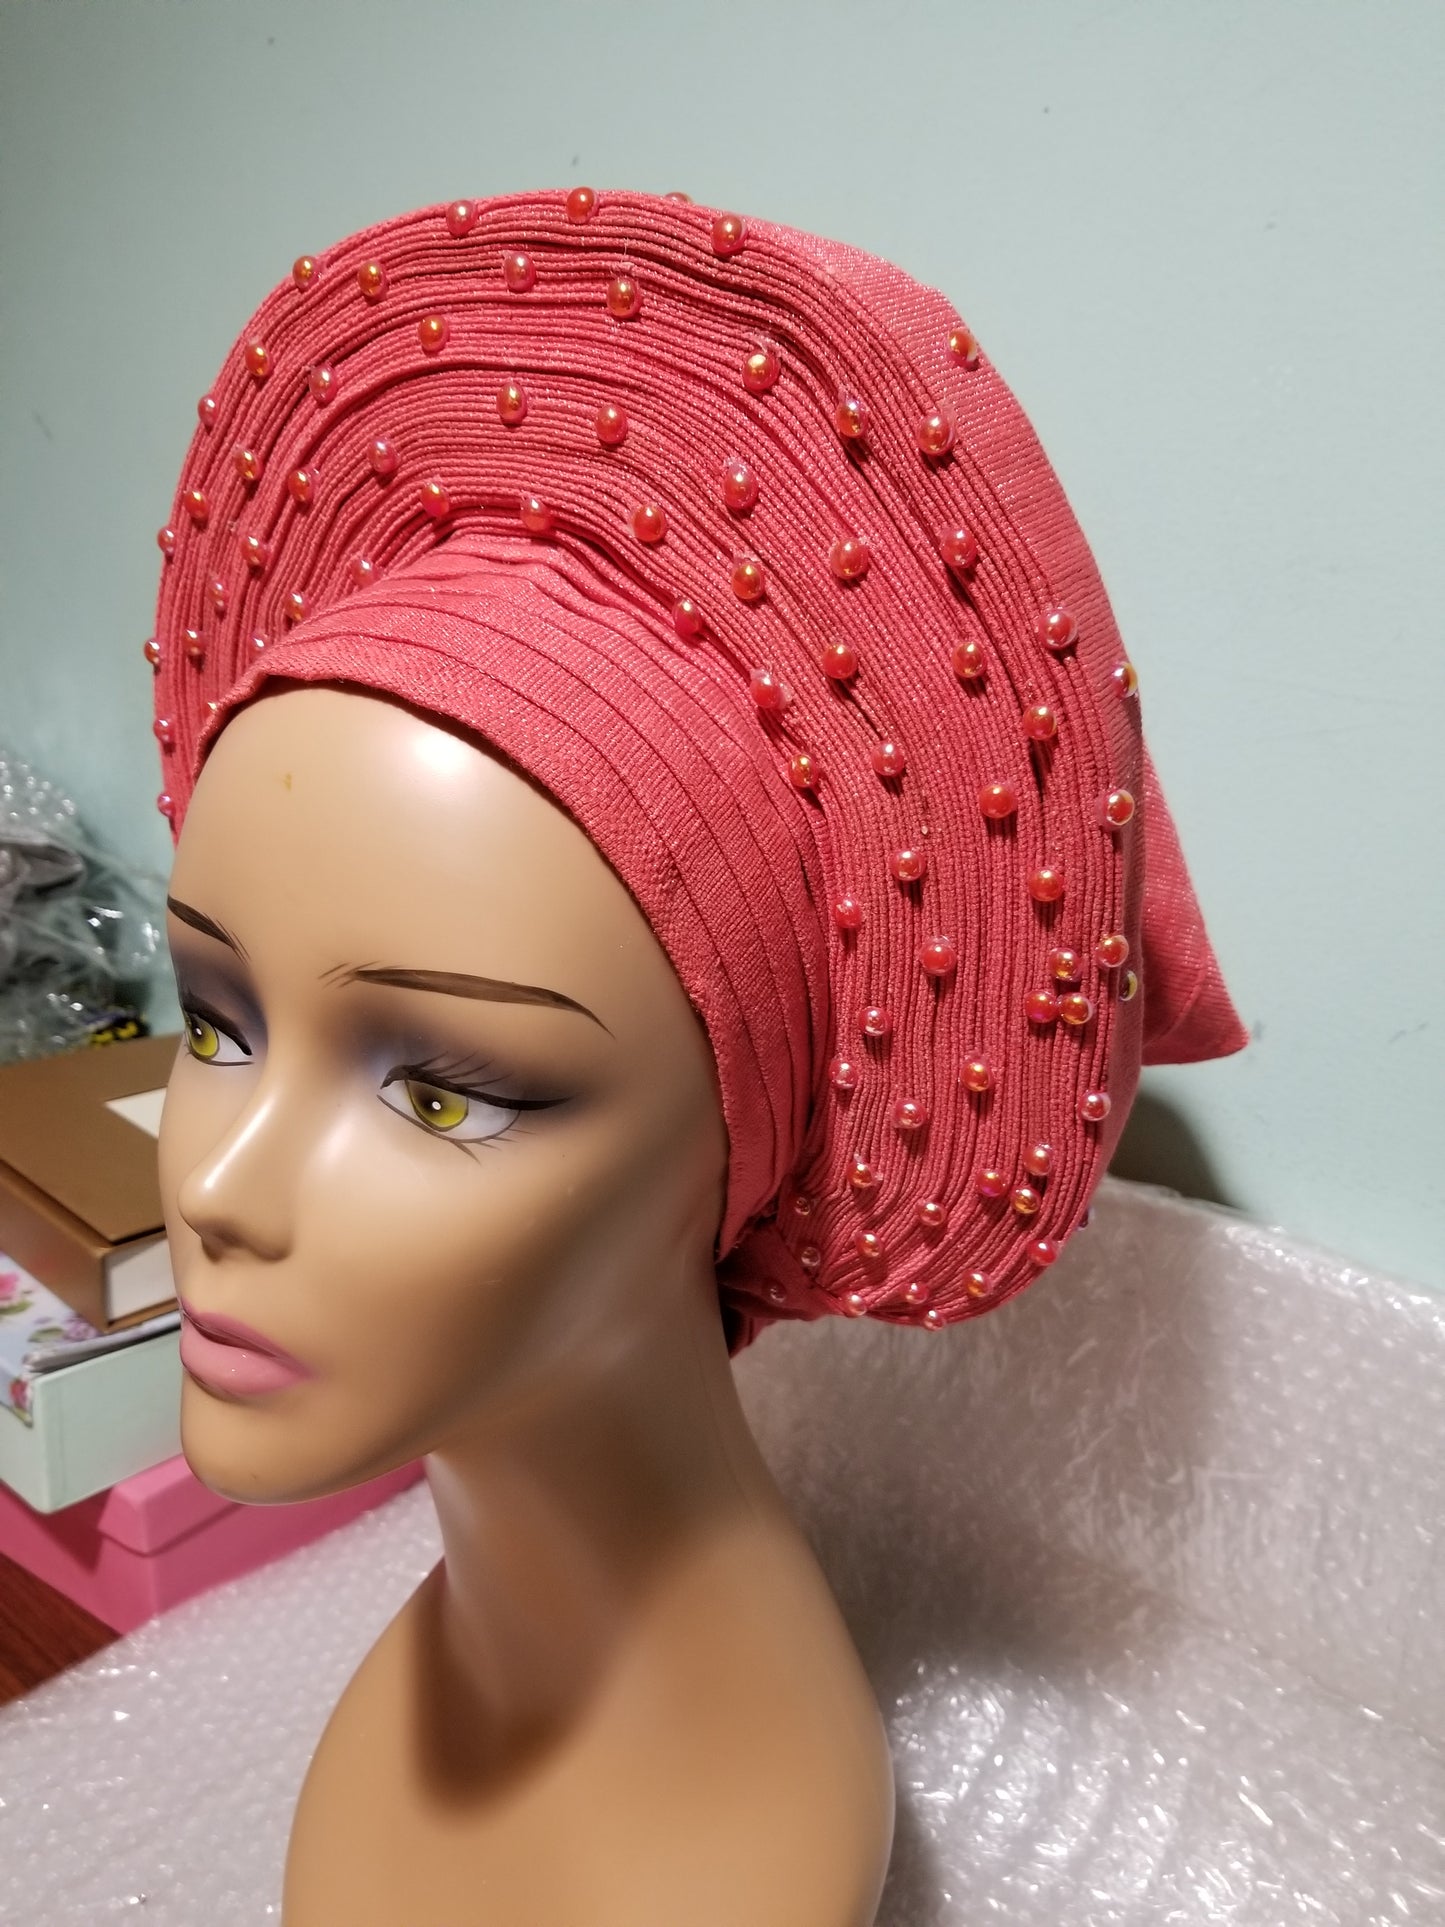 Coral color Auto-gele. Nigerian aso-oke made into auto gele. Silver color, beaded and stoned. Party ready in less than 5 minutes. One size fit, easy adjustment at the back